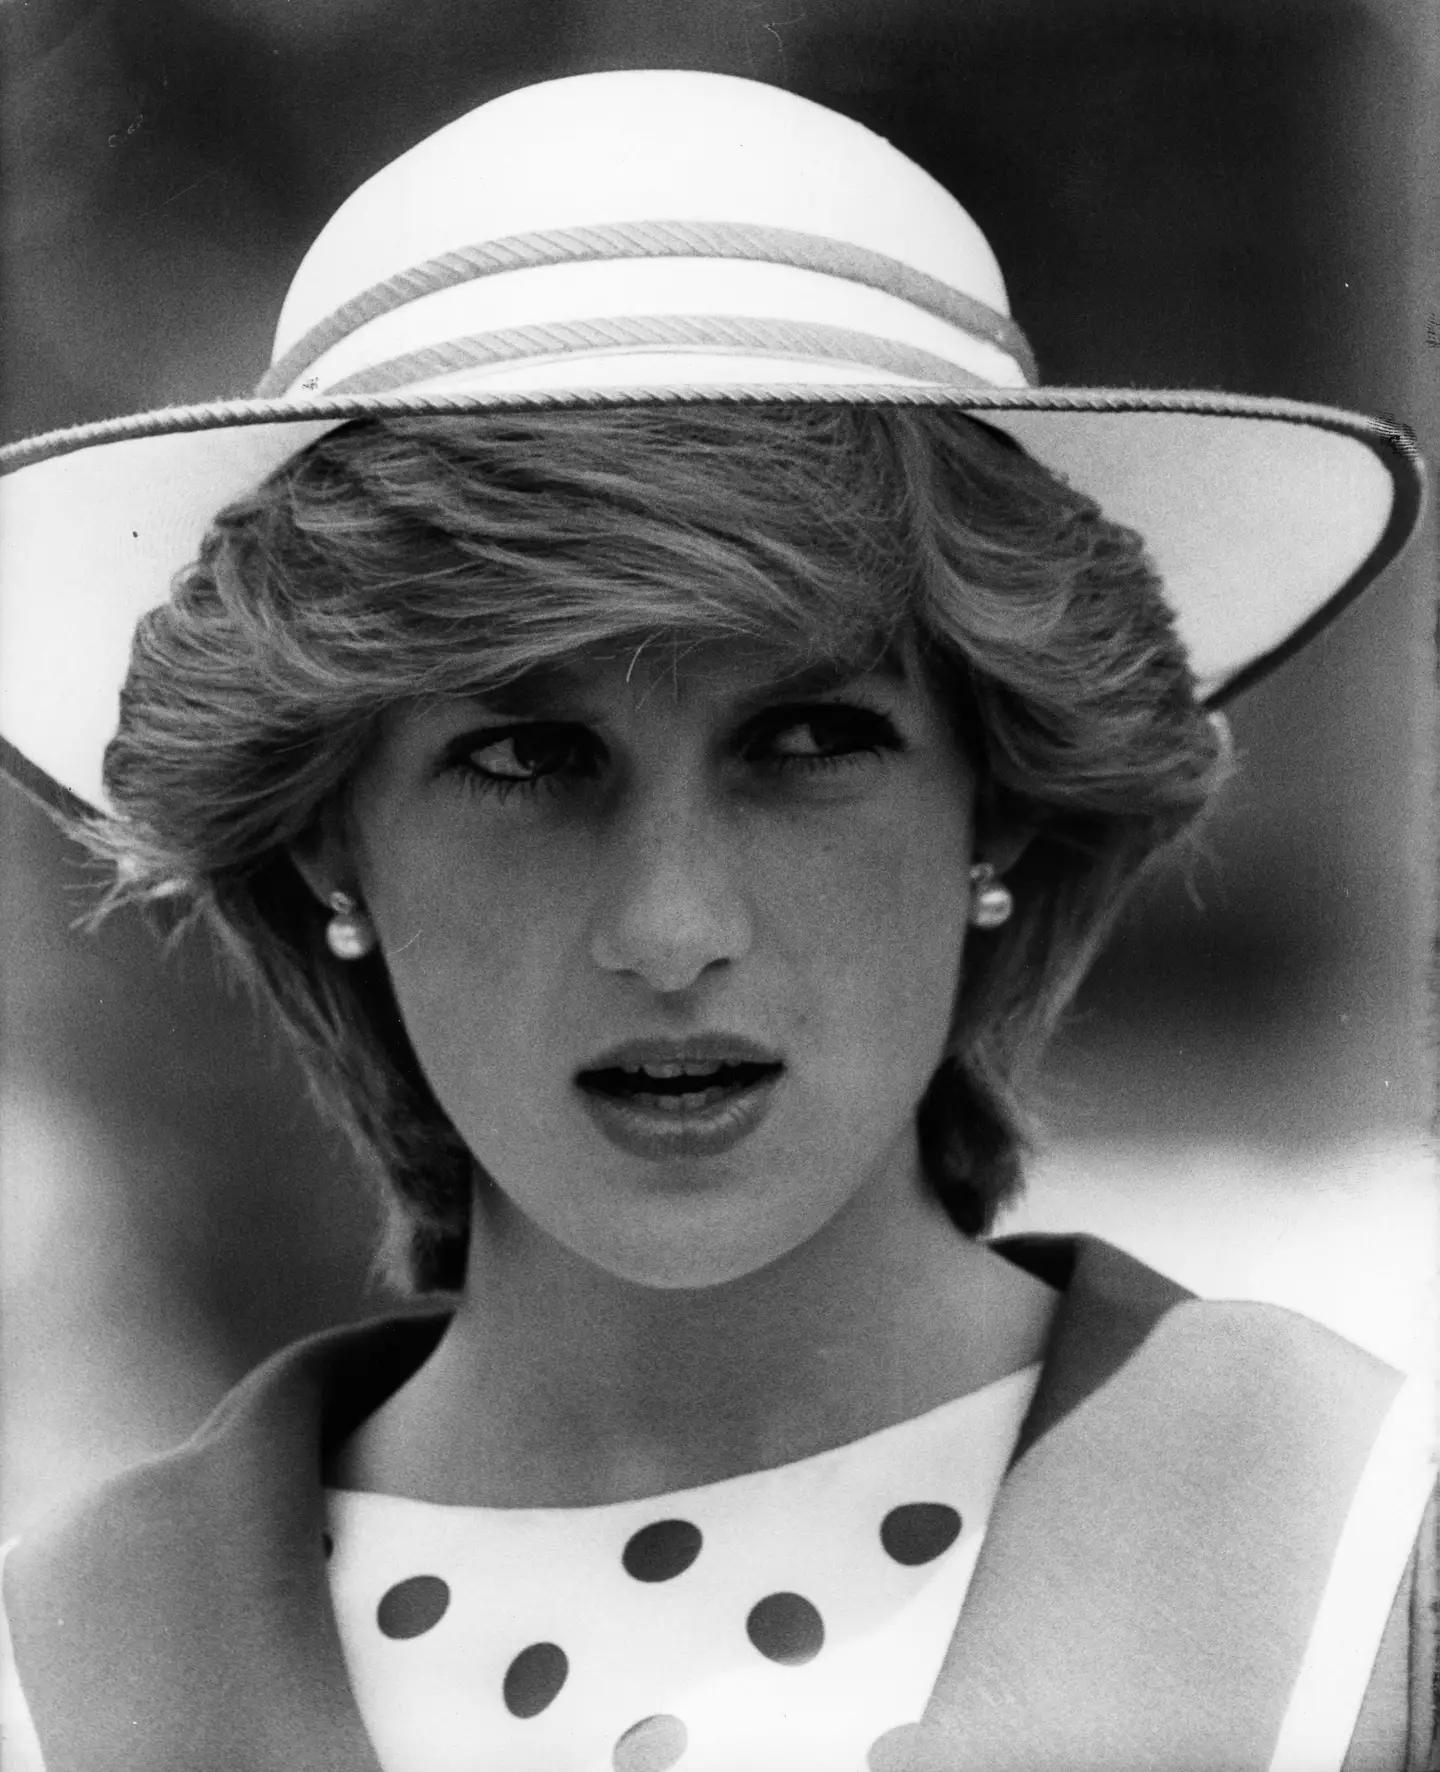 Princess Diana, reacting in the way we'd imagine would if she found out people wanted a sex doll version of her.